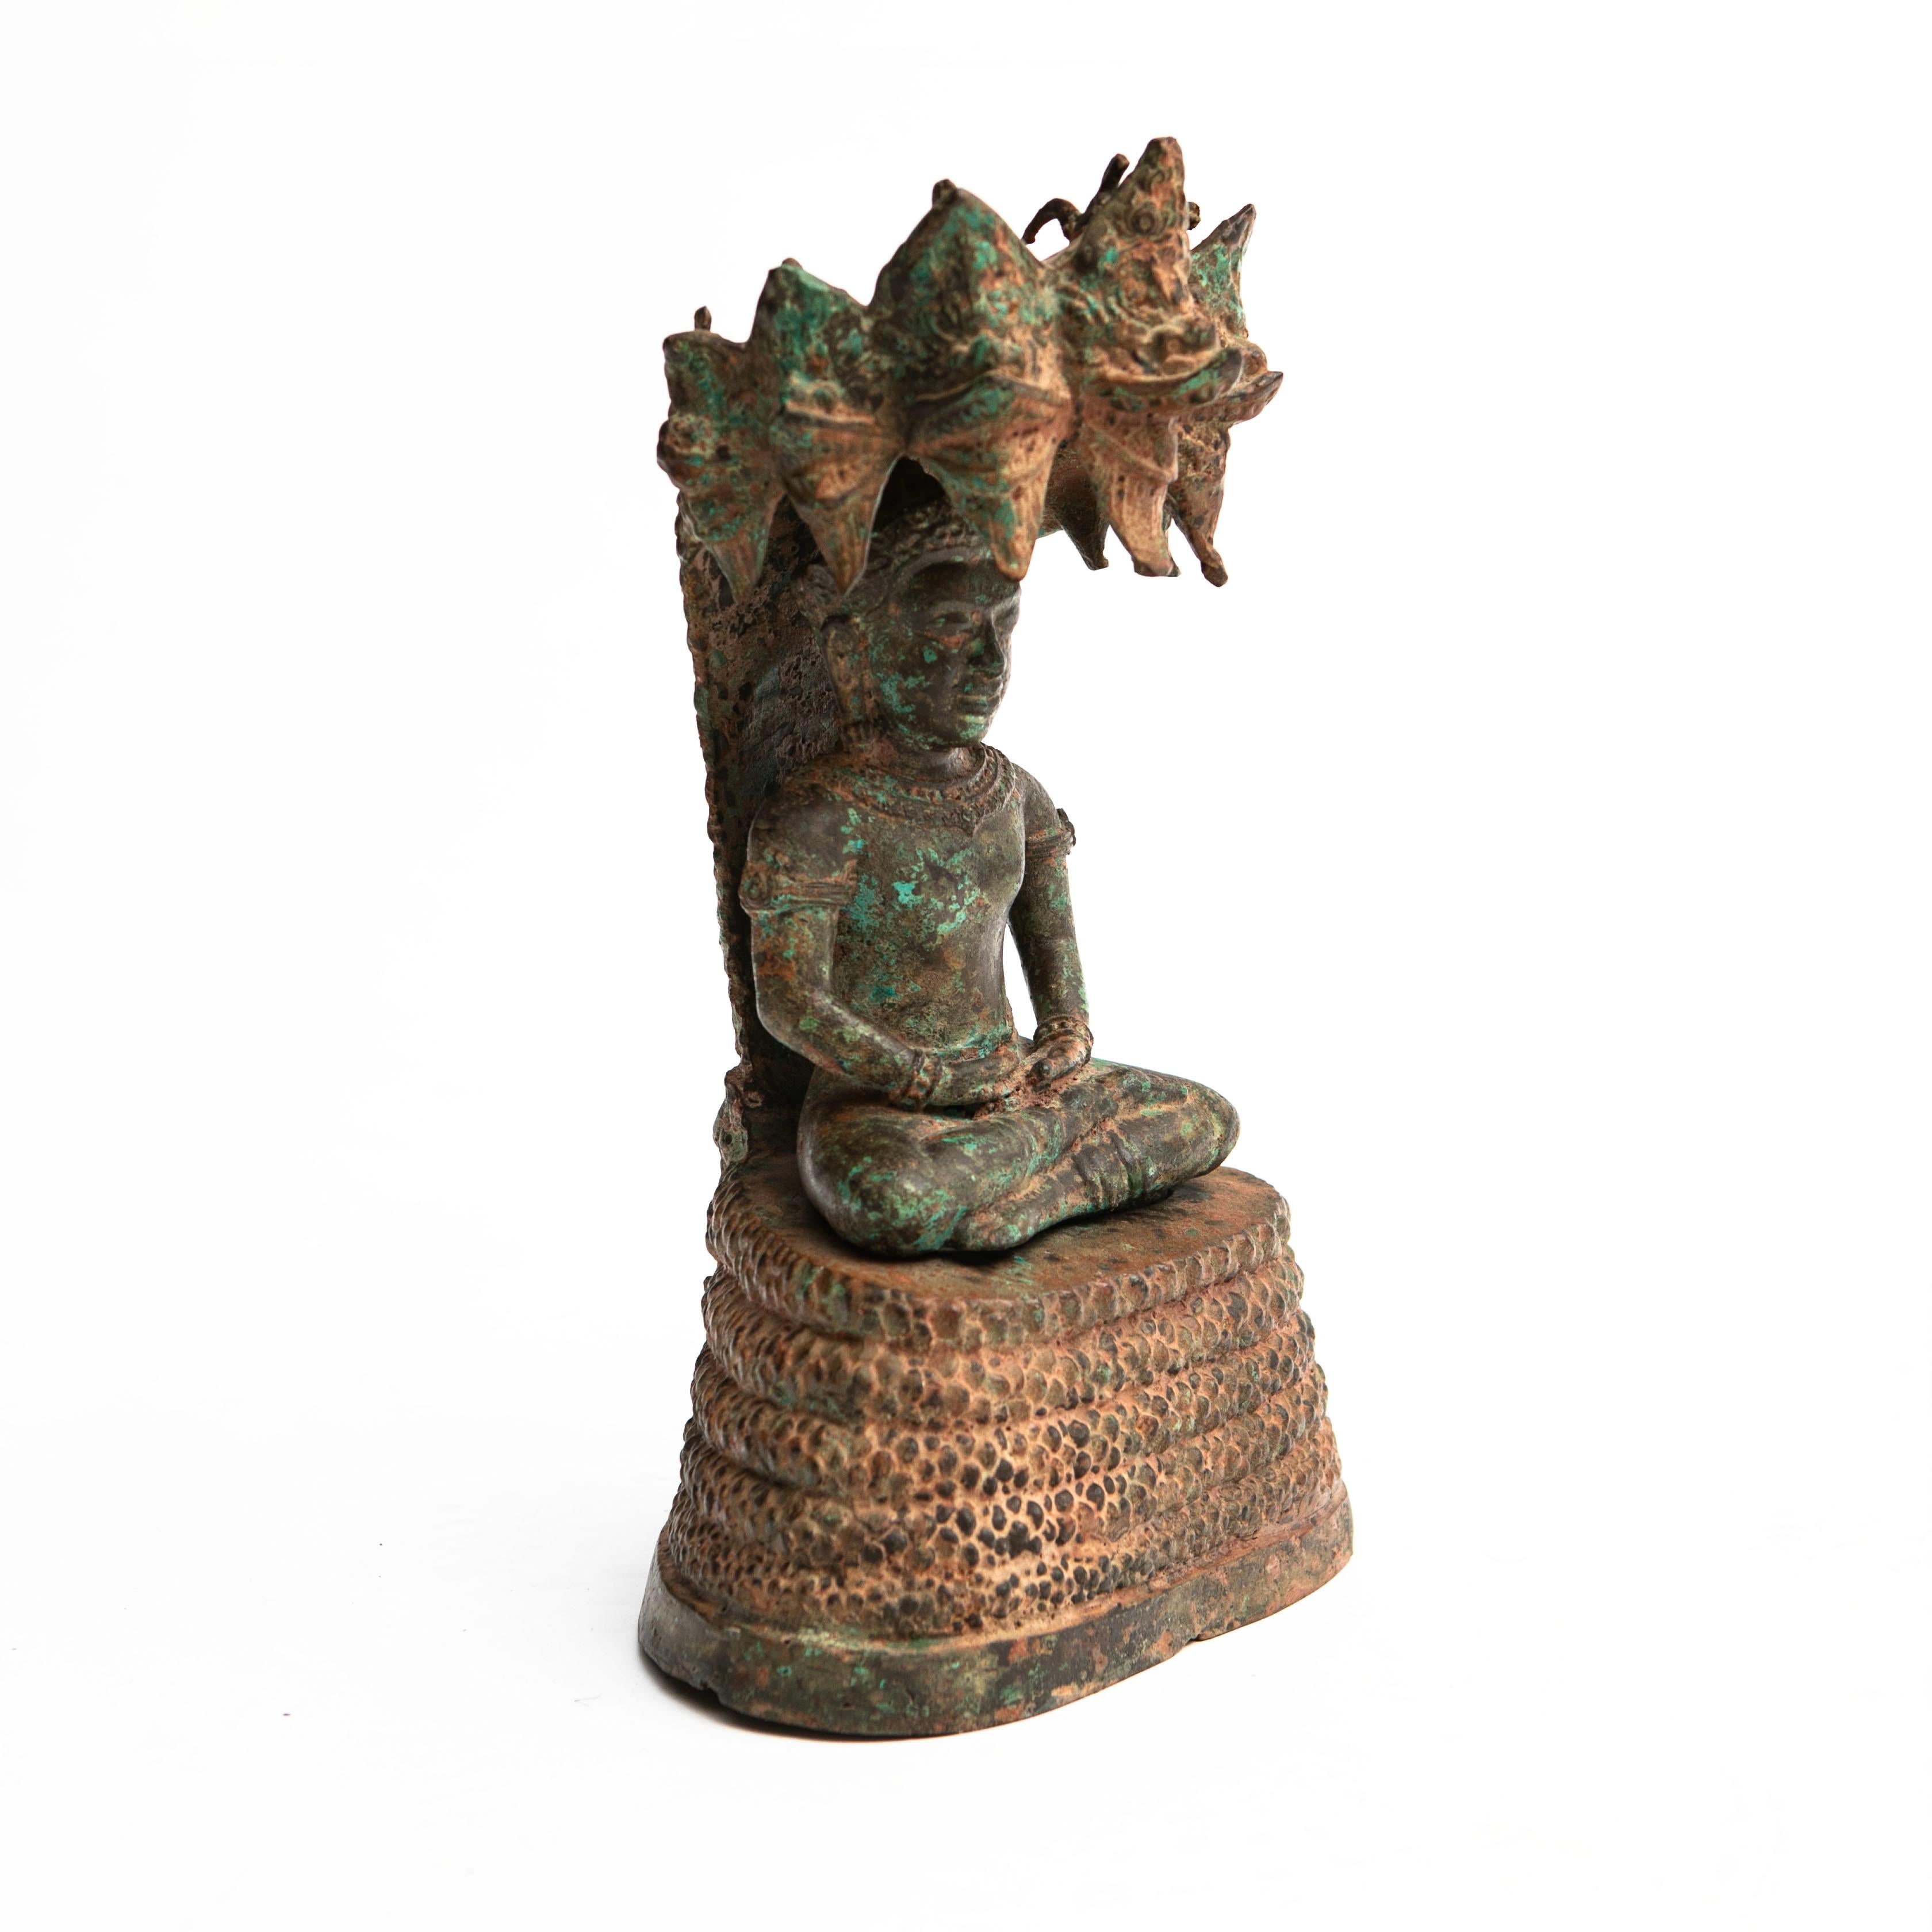 Bronze Buddha depicted in meditation pose sheltered by a Naga (a seven-headed snake). I two parts.
Naga's body coiled up to serve as a cushion for the Buddha with 7 pronged head providing a hood over the Buddha's head as a cover. Original condition